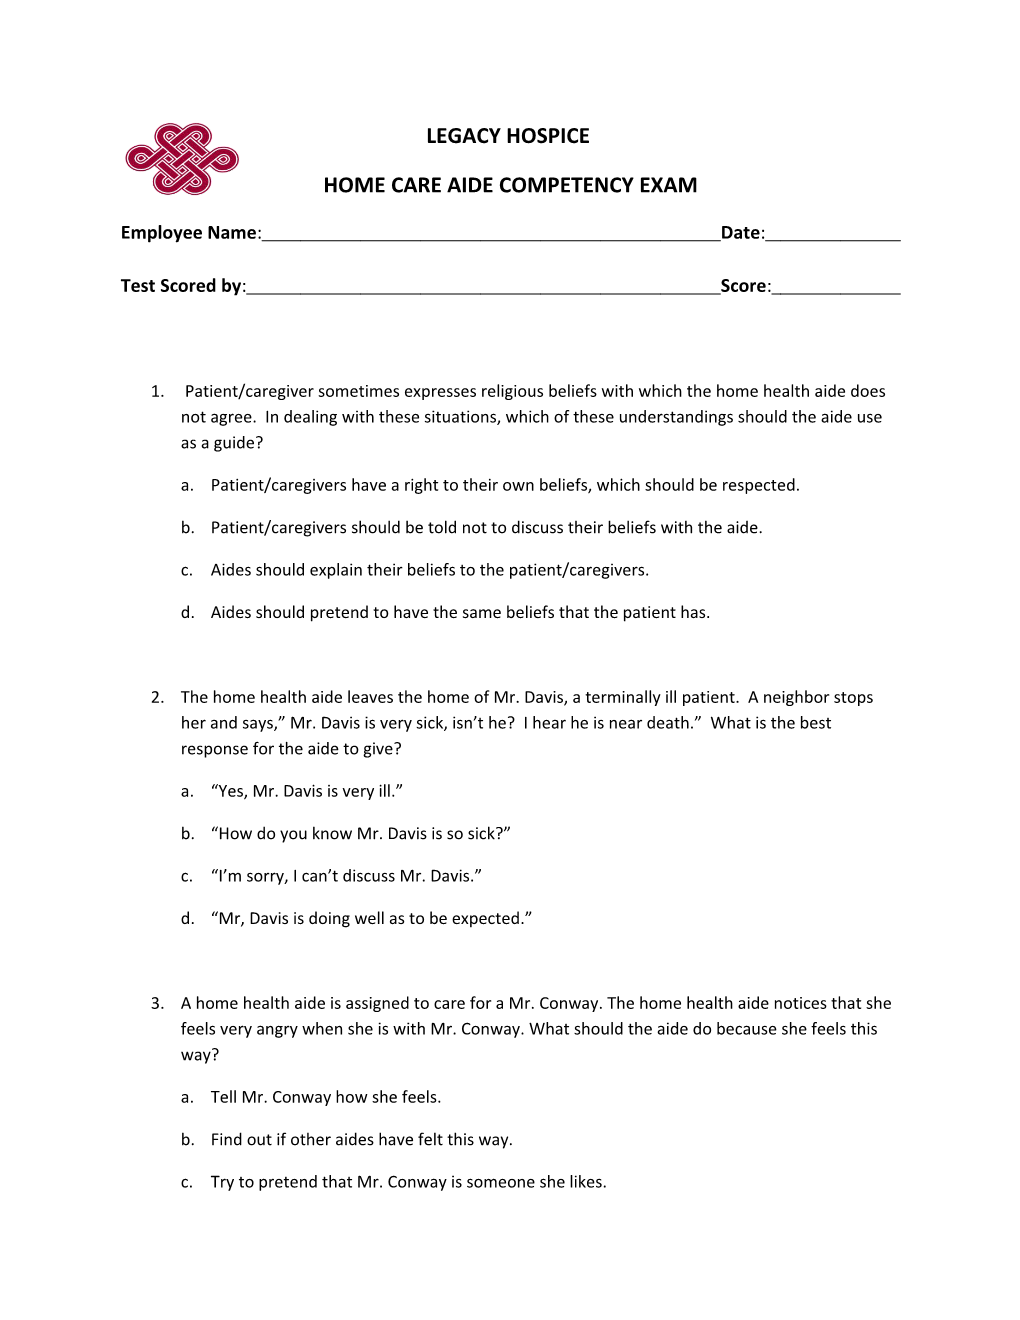 Home Care Aide Competency Exam